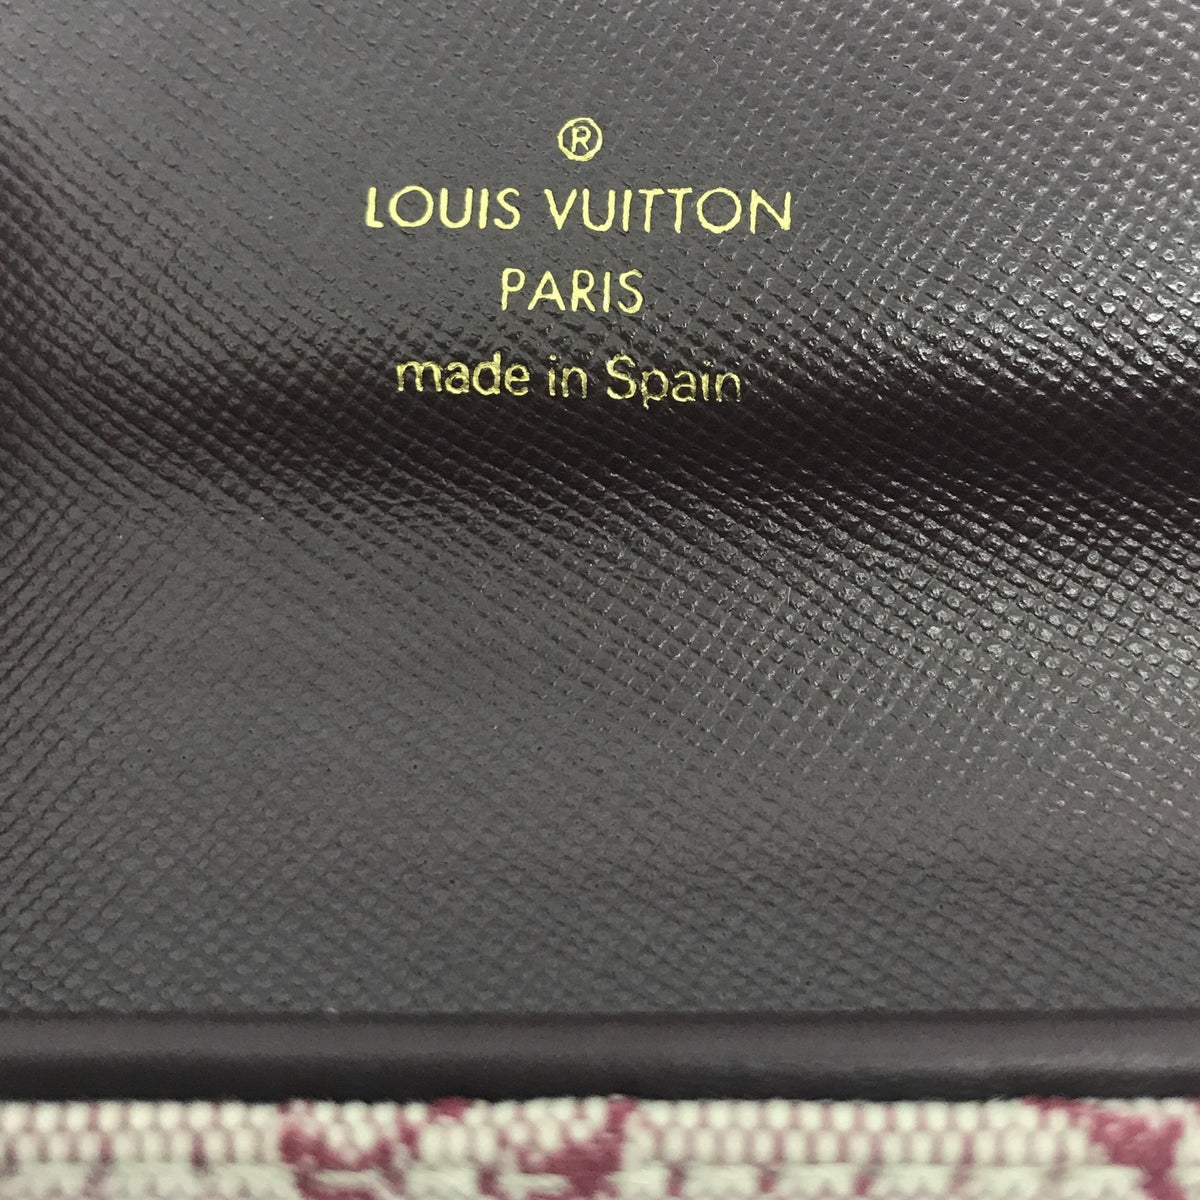 Louis Vuitton - Customized Wallet in France